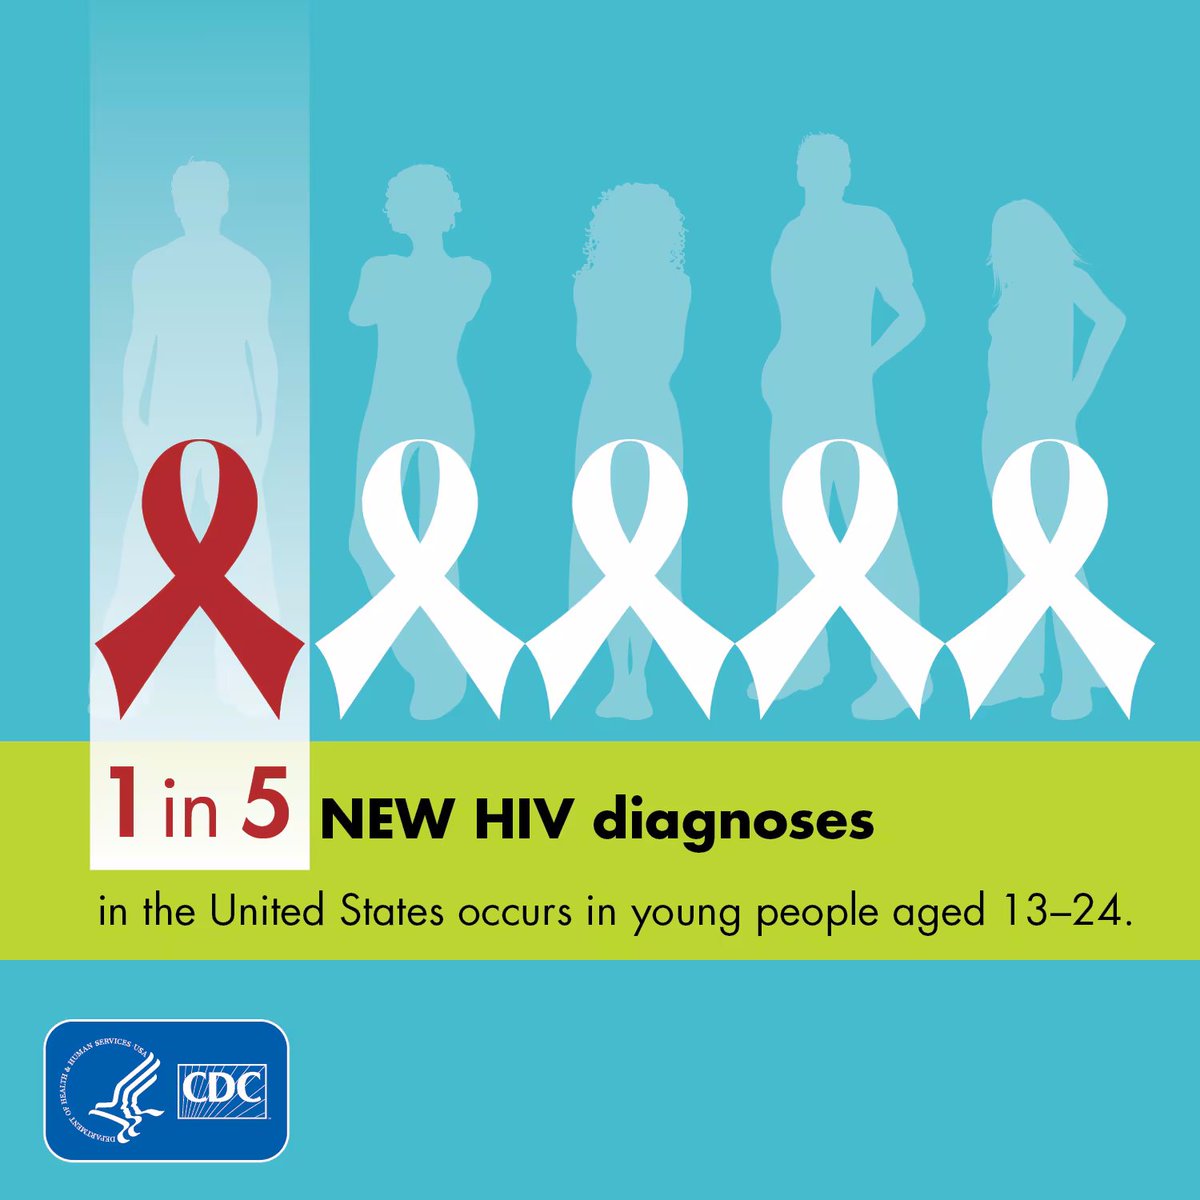 Providers working in #Pediatrics: Did you know 1 in 5 new HIV diagnoses occurs in young people ages 13-24? This National Youth HIV & AIDS Awareness Day, learn more about how you can foster connections and help end #HIV bit.ly/3LsRWWM. @CDC_DASH #NYHAAD